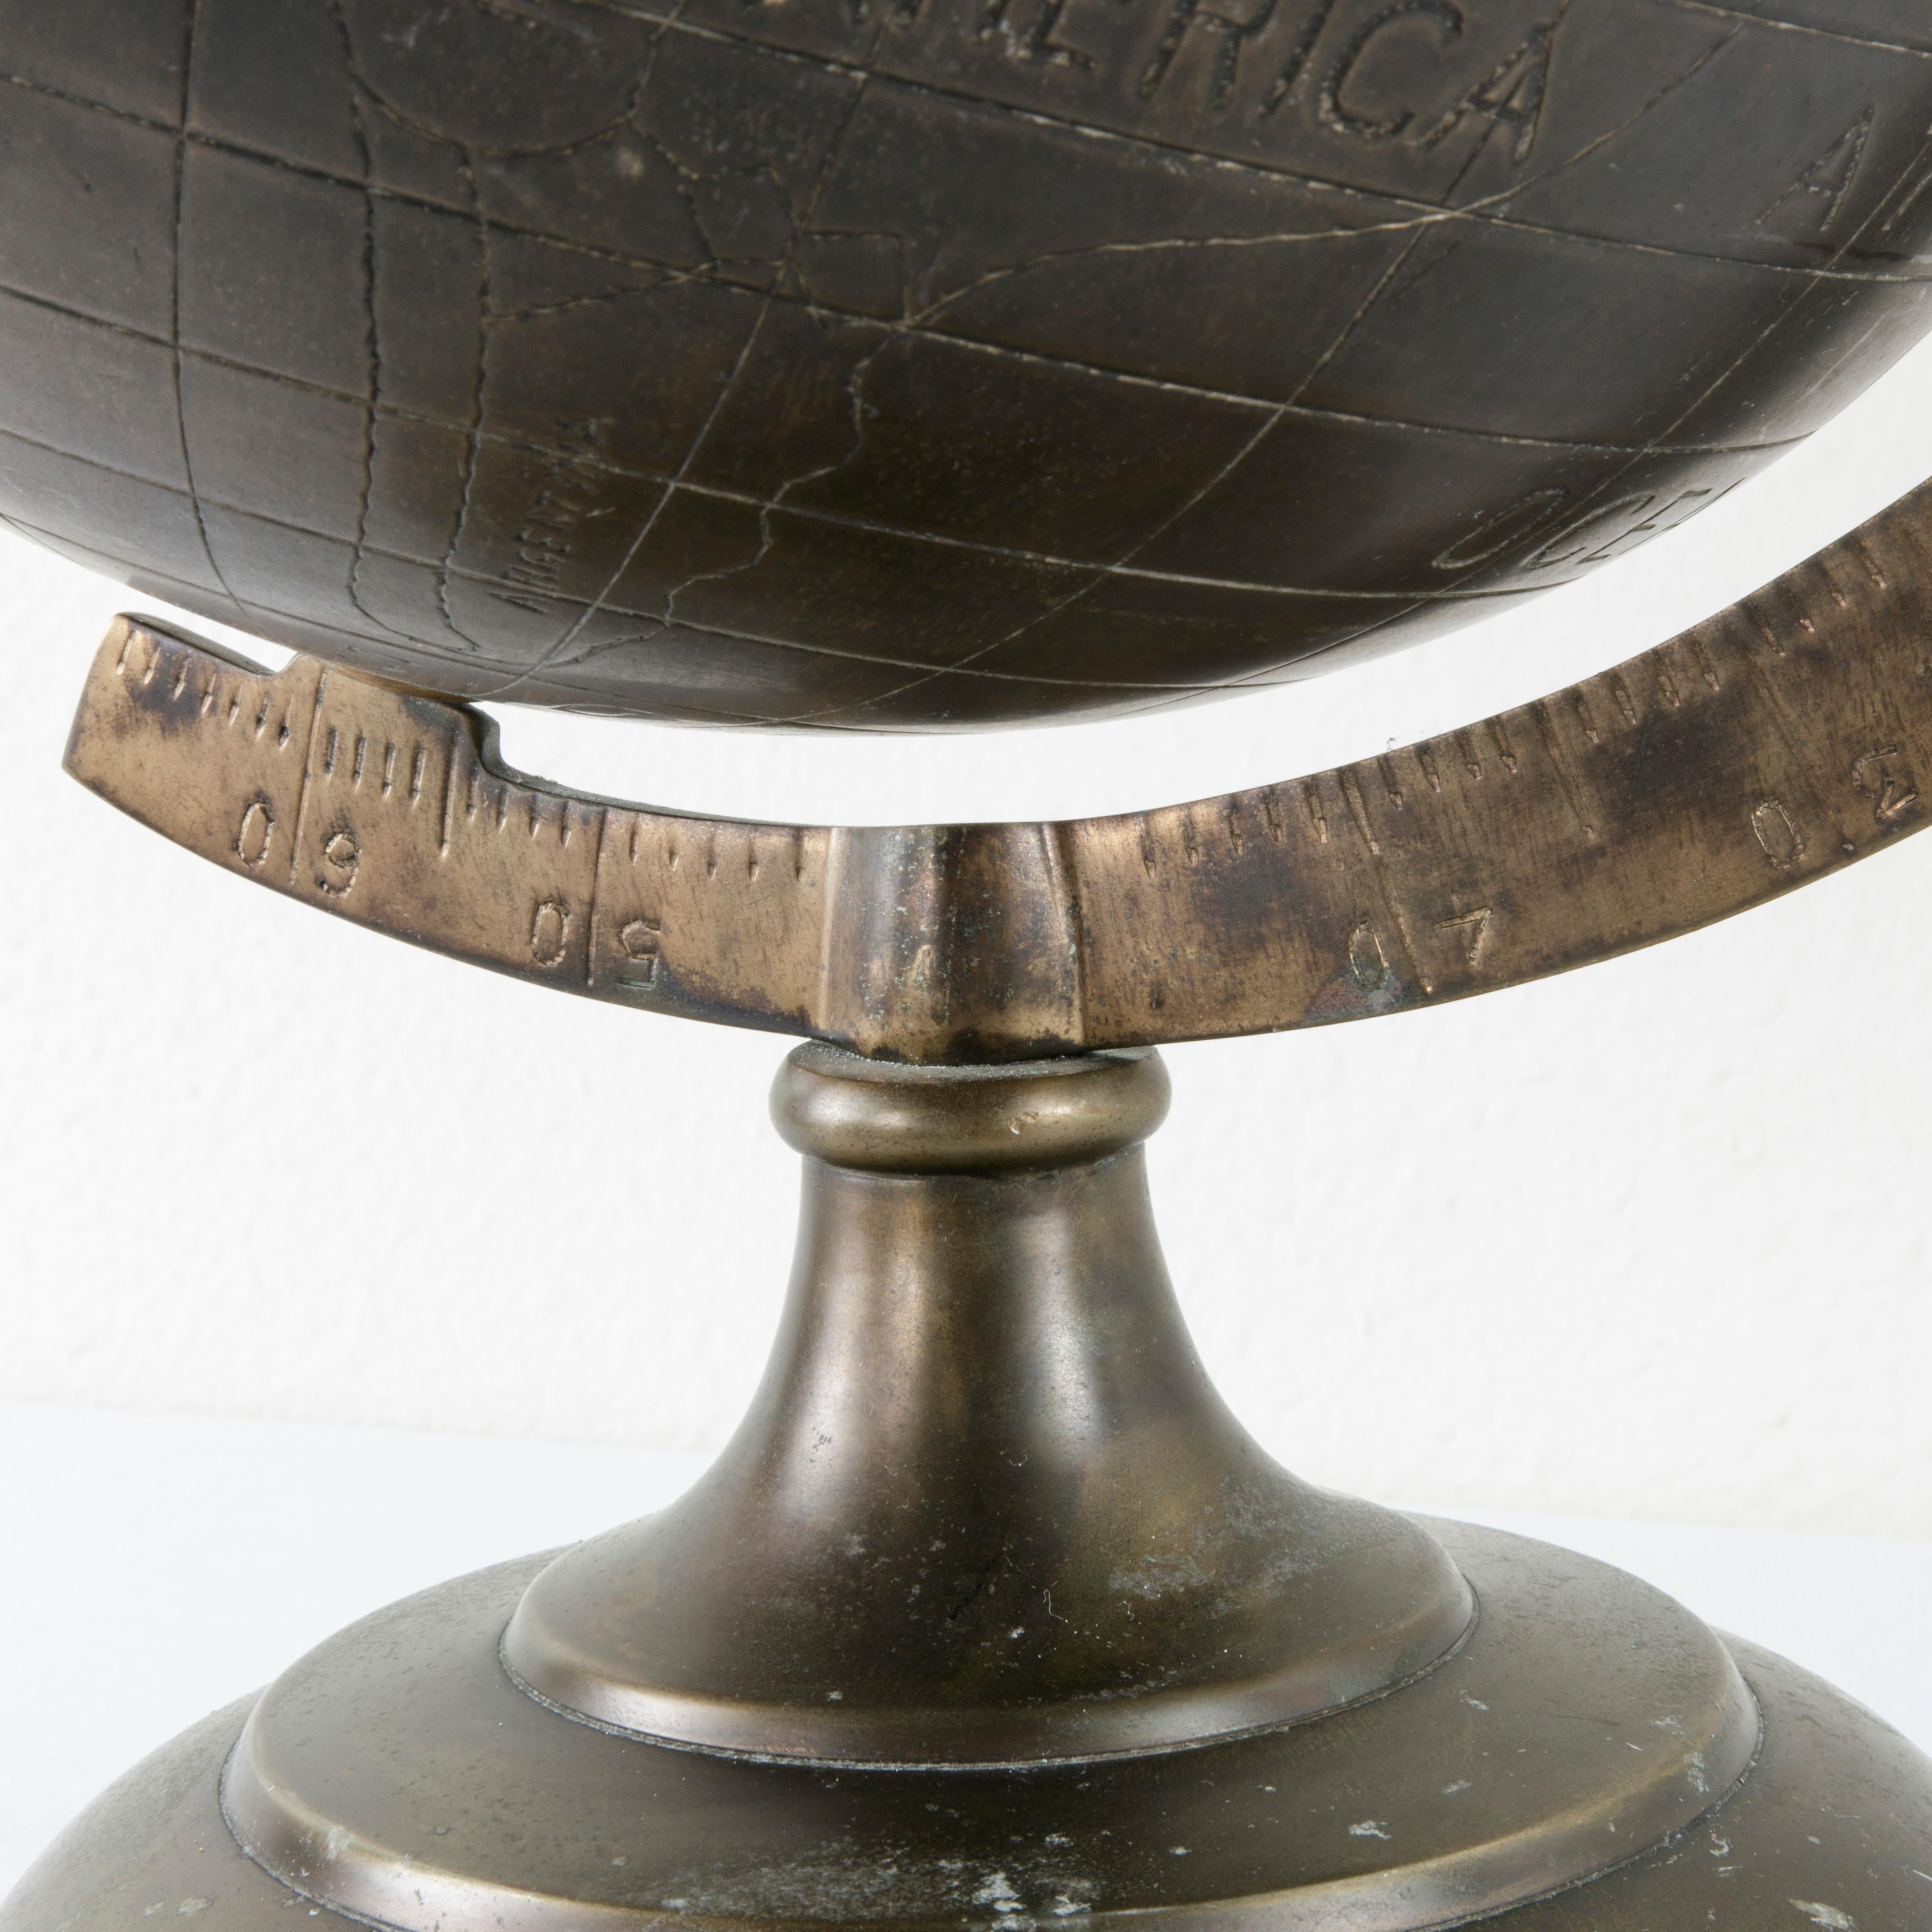 20th Century Stylized Etched Bronze Globe on Axis Labeled in English 1